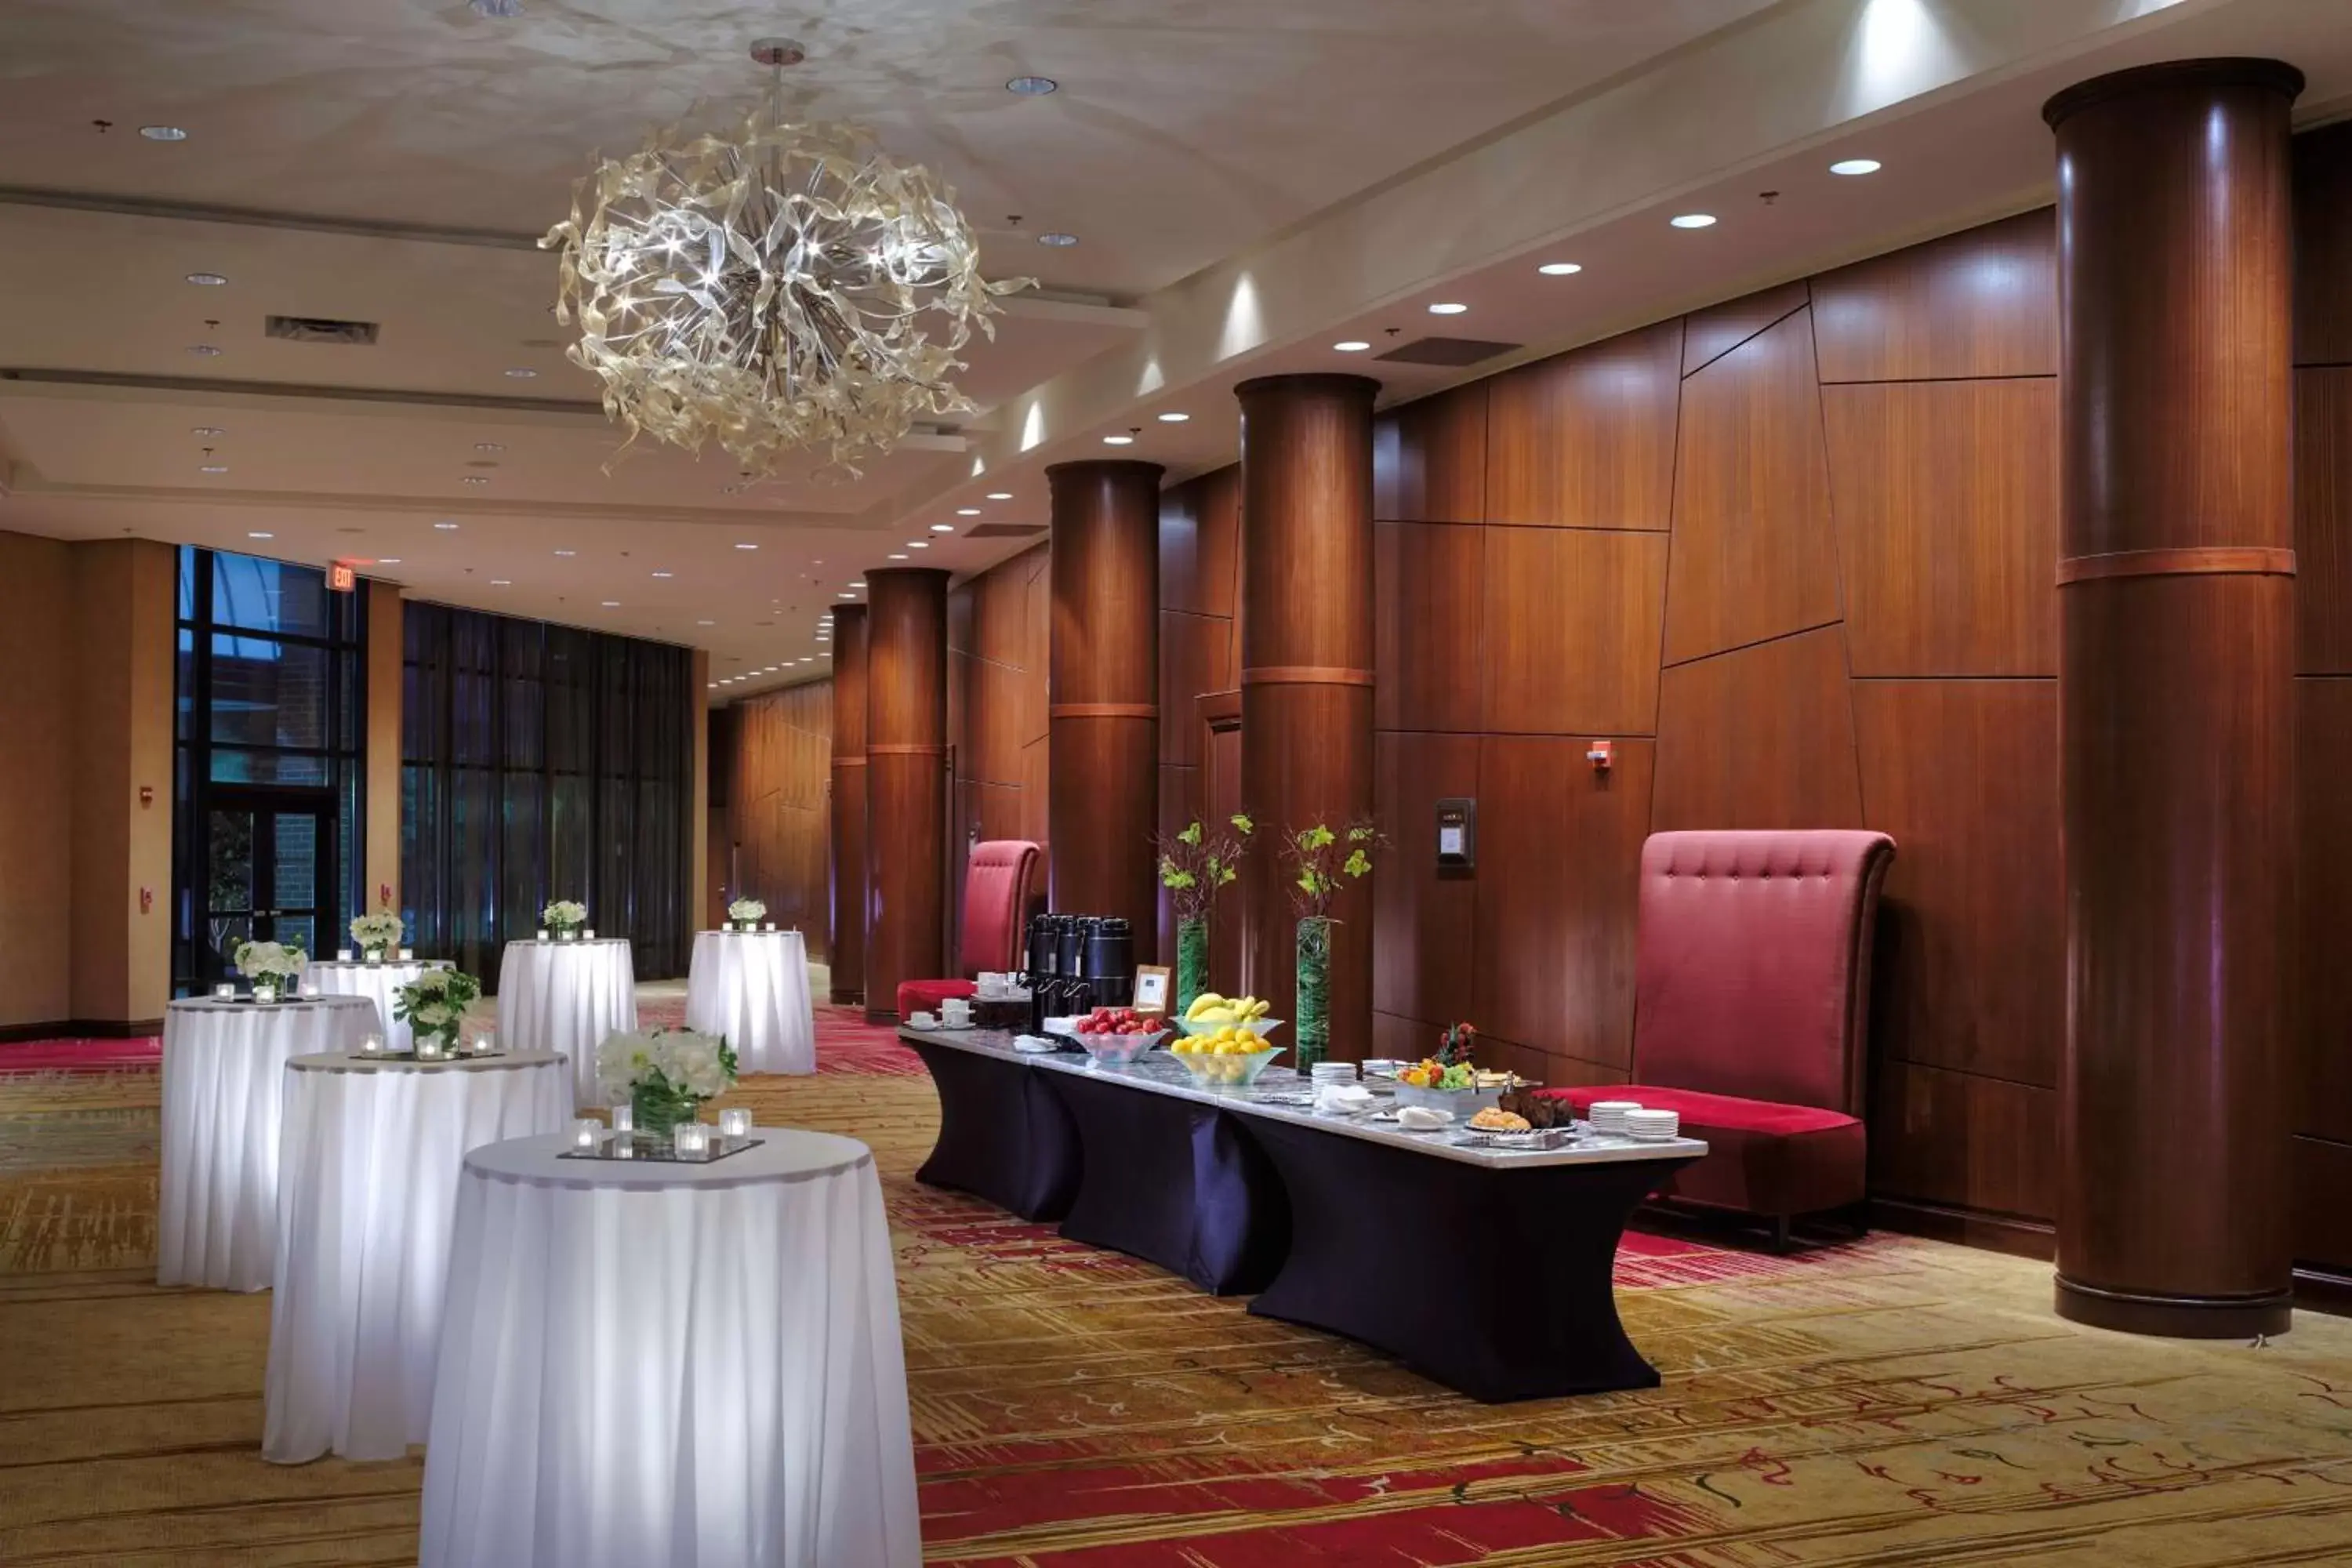 Meeting/conference room, Banquet Facilities in Hilton Washington Dulles Airport